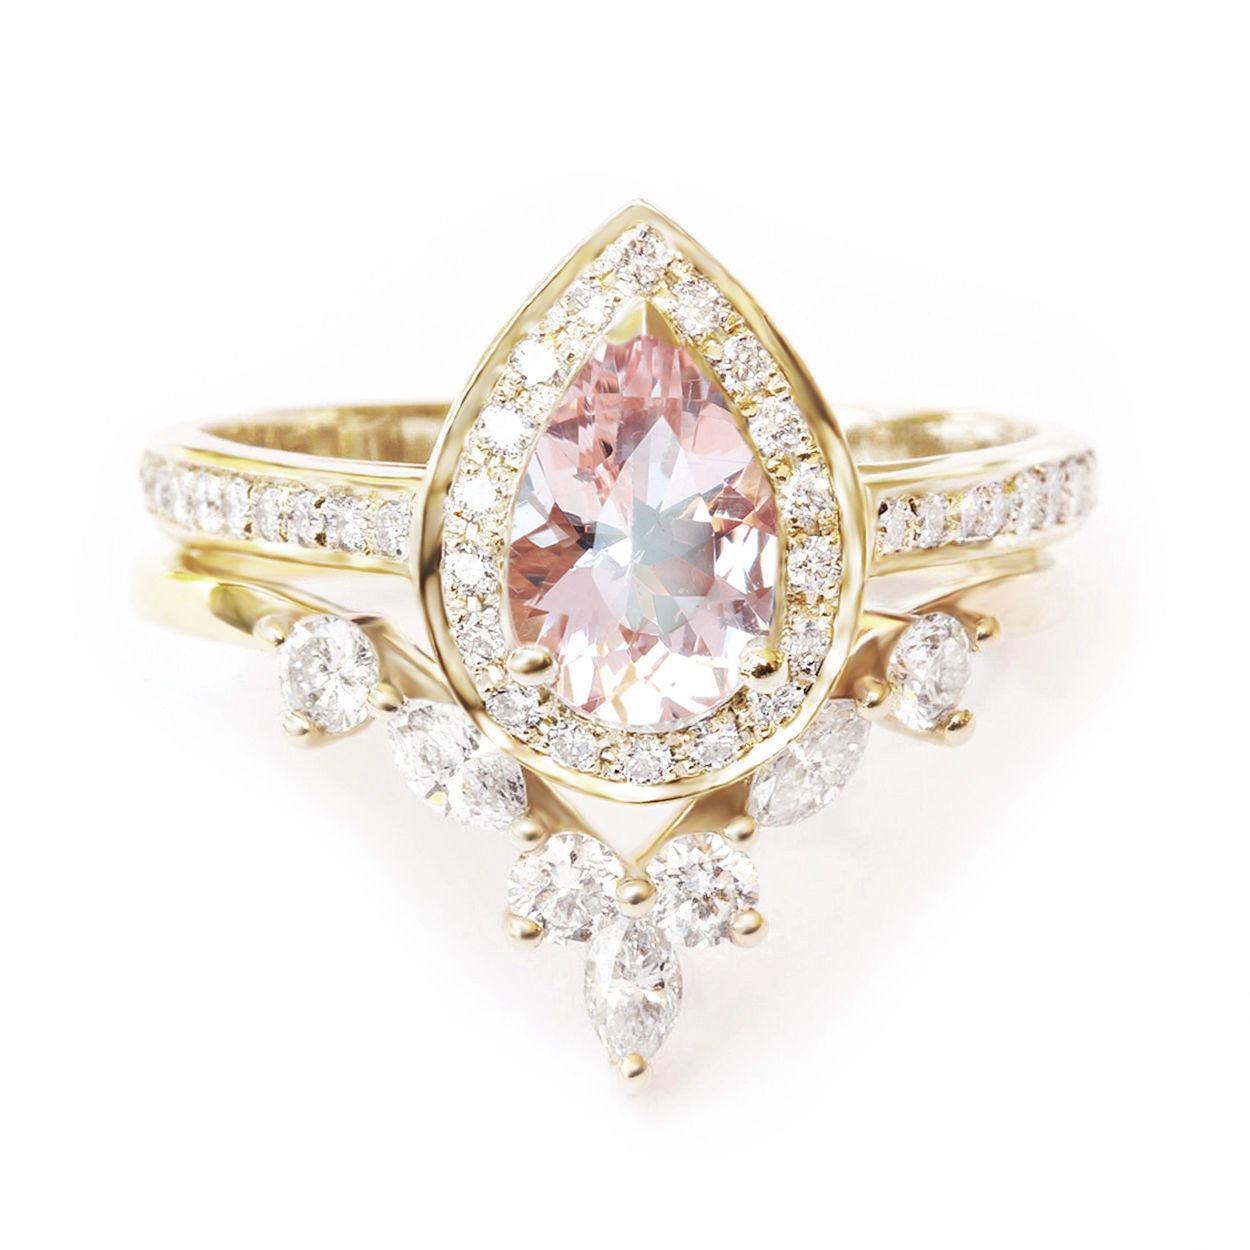 Beautiful pear shape Morganite Halo engagement ring set with a diamond wedding band.
The list is for the two ring set.
Hand made with care. 
An original design by Silly Shiny Diamonds. 

Details: 
* Center Stone Shape: Pear shape. 
* Center Stone